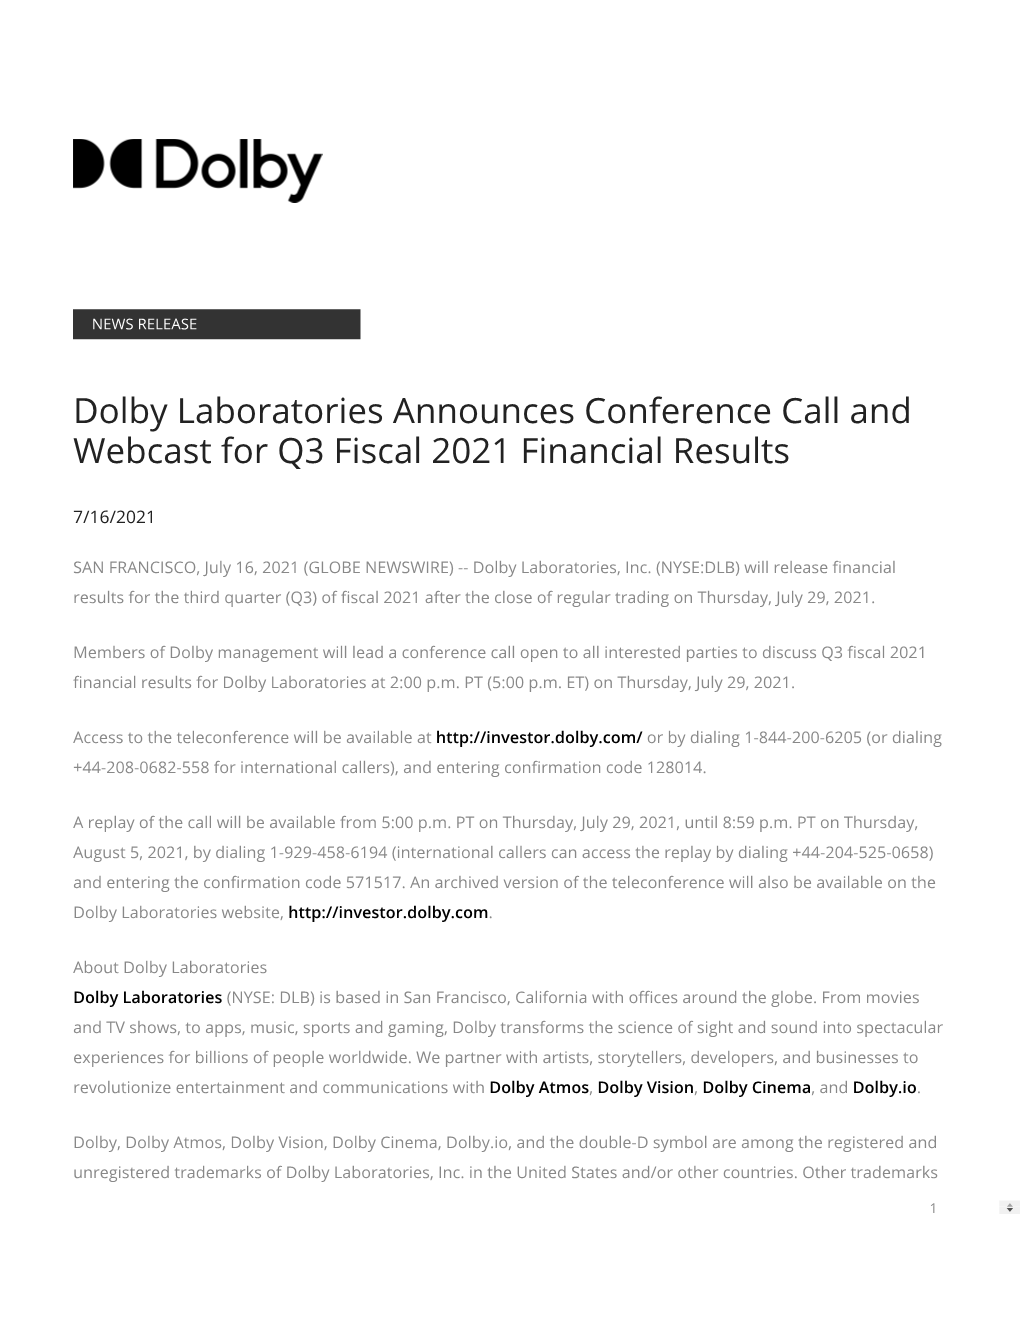 Dolby Laboratories Announces Conference Call and Webcast for Q3 Fiscal 2021 Financial Results